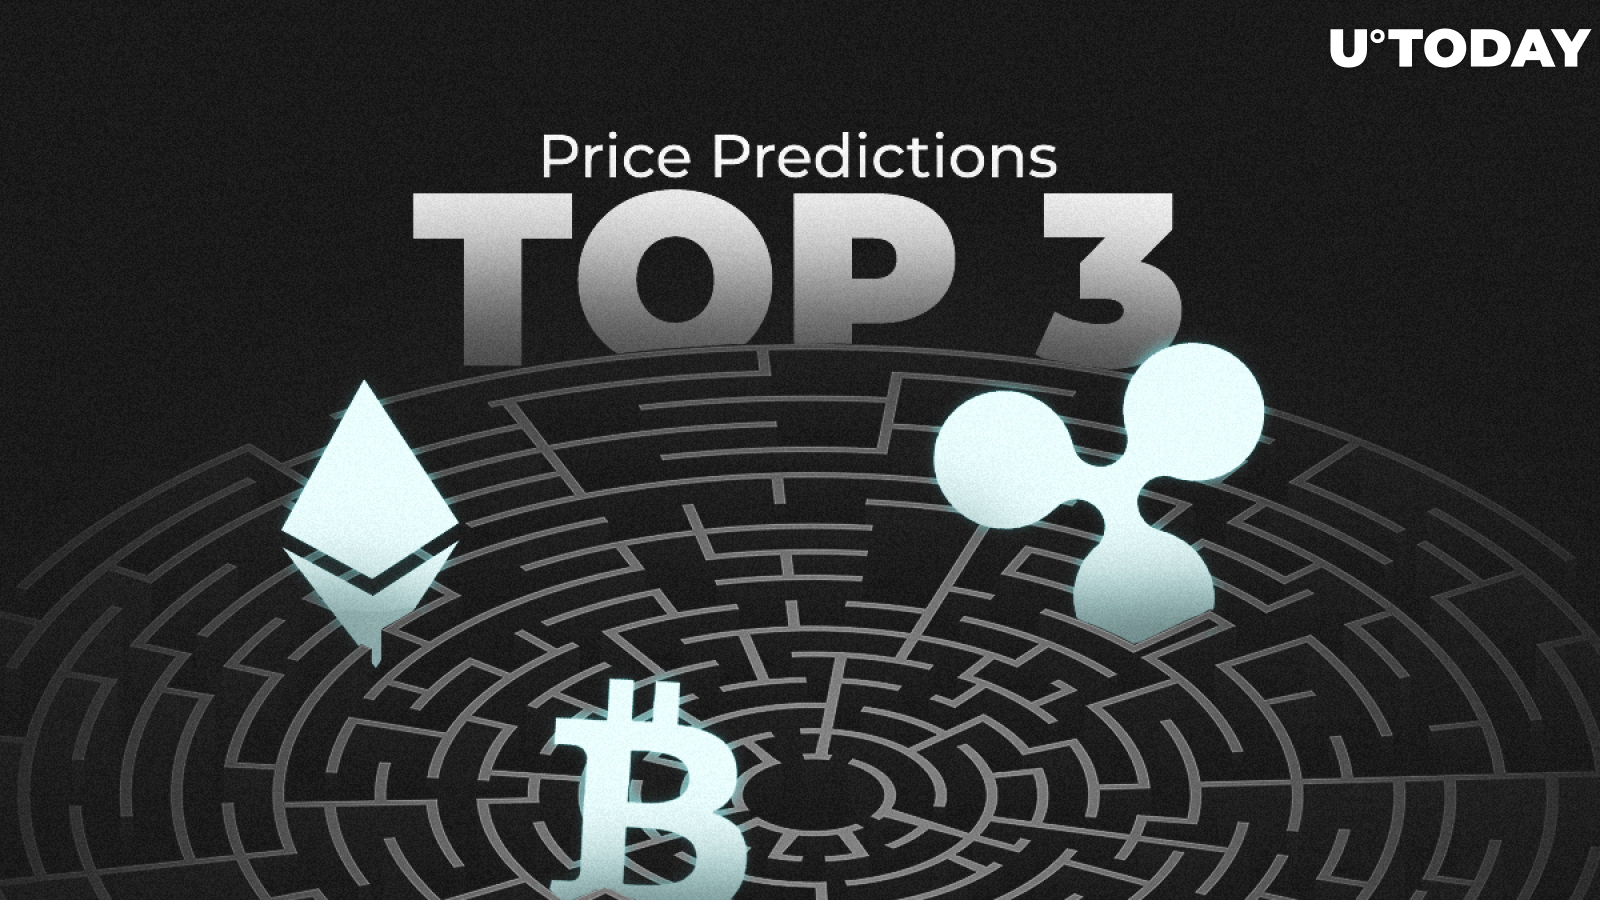 TOP 3 Price Predictions: Bitcoin (BTC), Ethereum (ETH), Ripple (XRP) — Market In Uncertainty or Bulls Are Back In The Game?